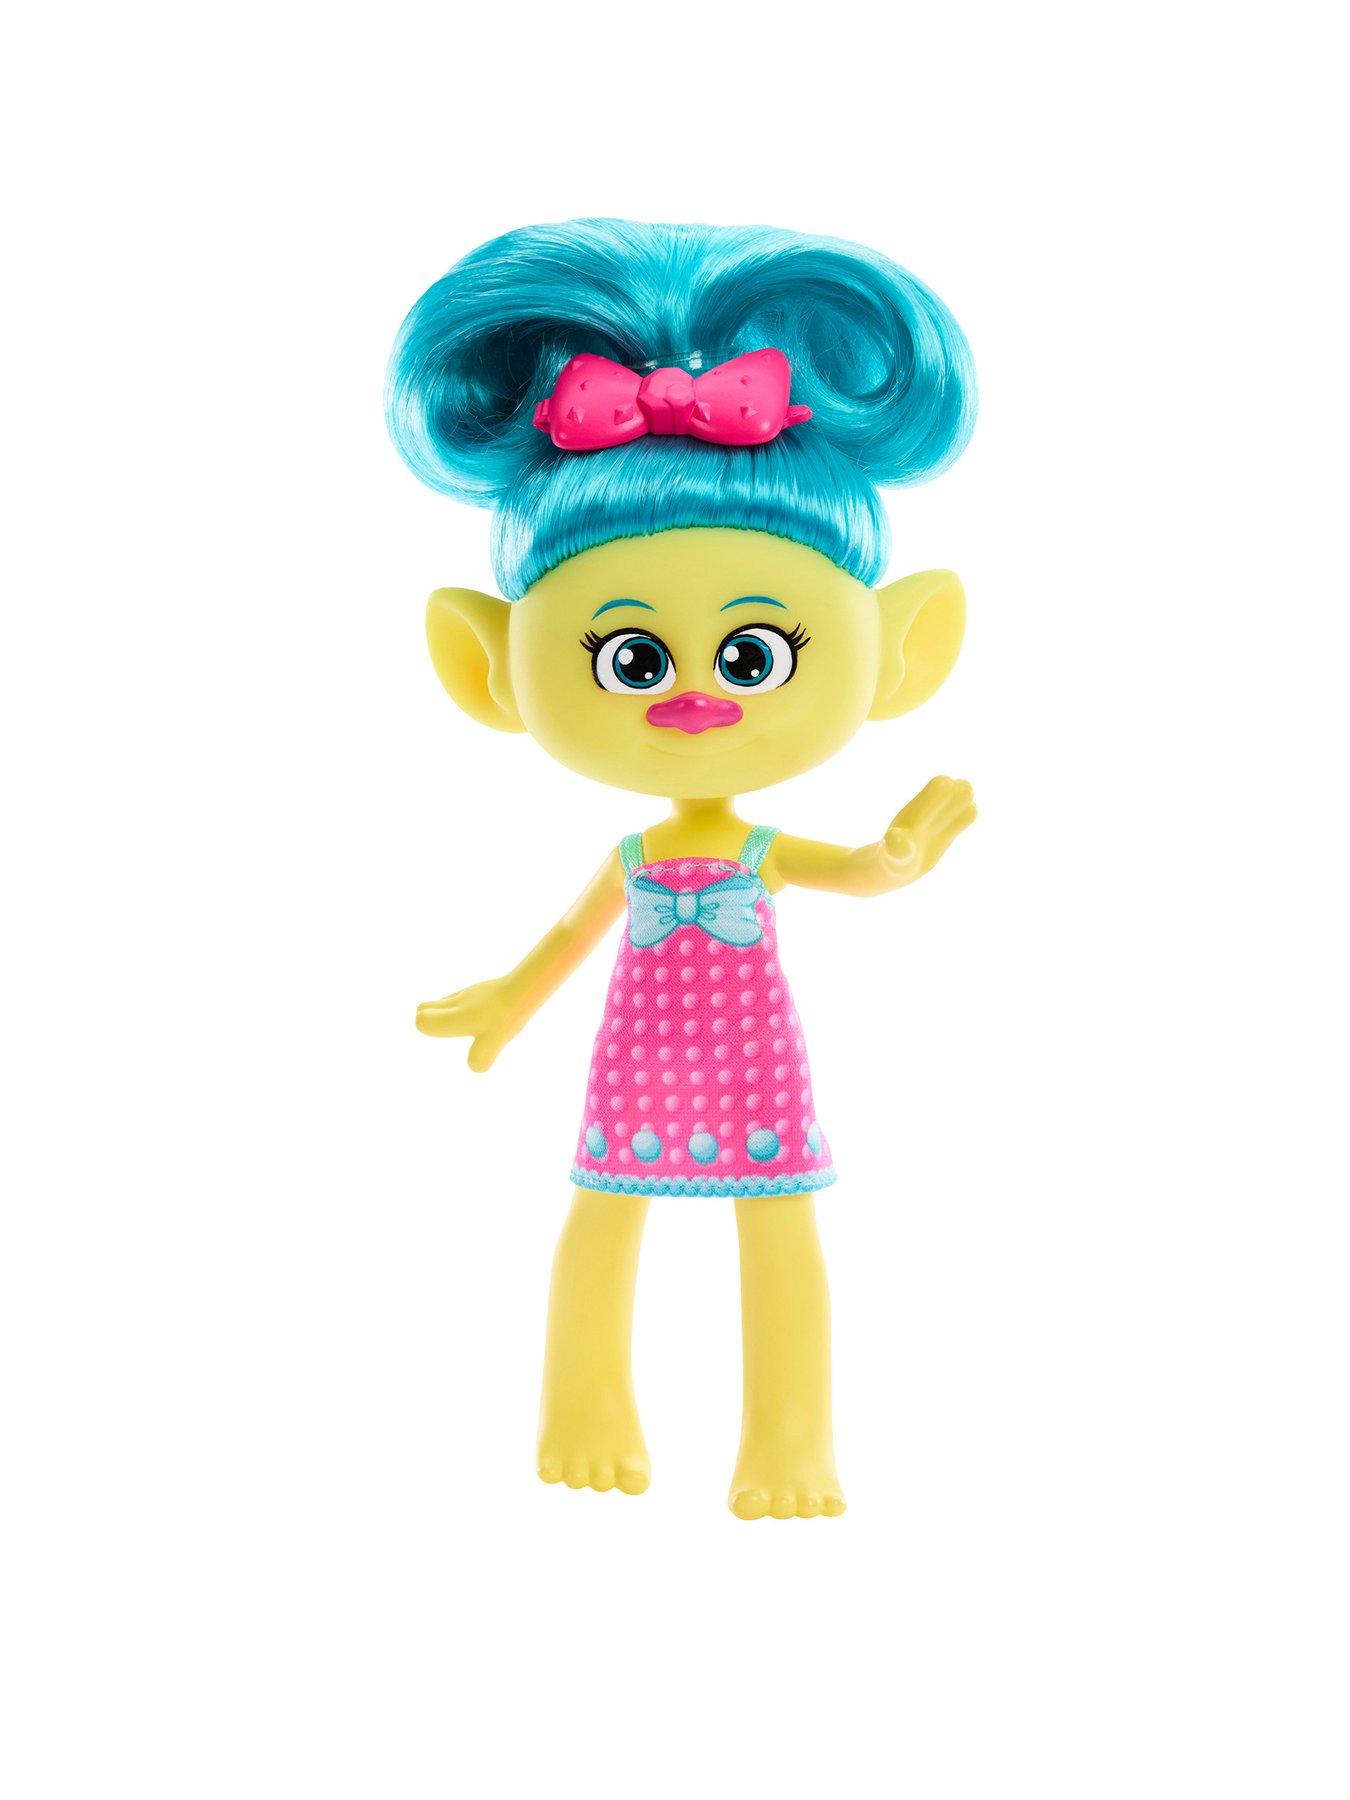 Trolls DreamWorks Band Together Mineez 11pc Brozone + Friends Performance  Pack - 11 Mineez 1.5 Inch Collectible Figures and 1 Accessory